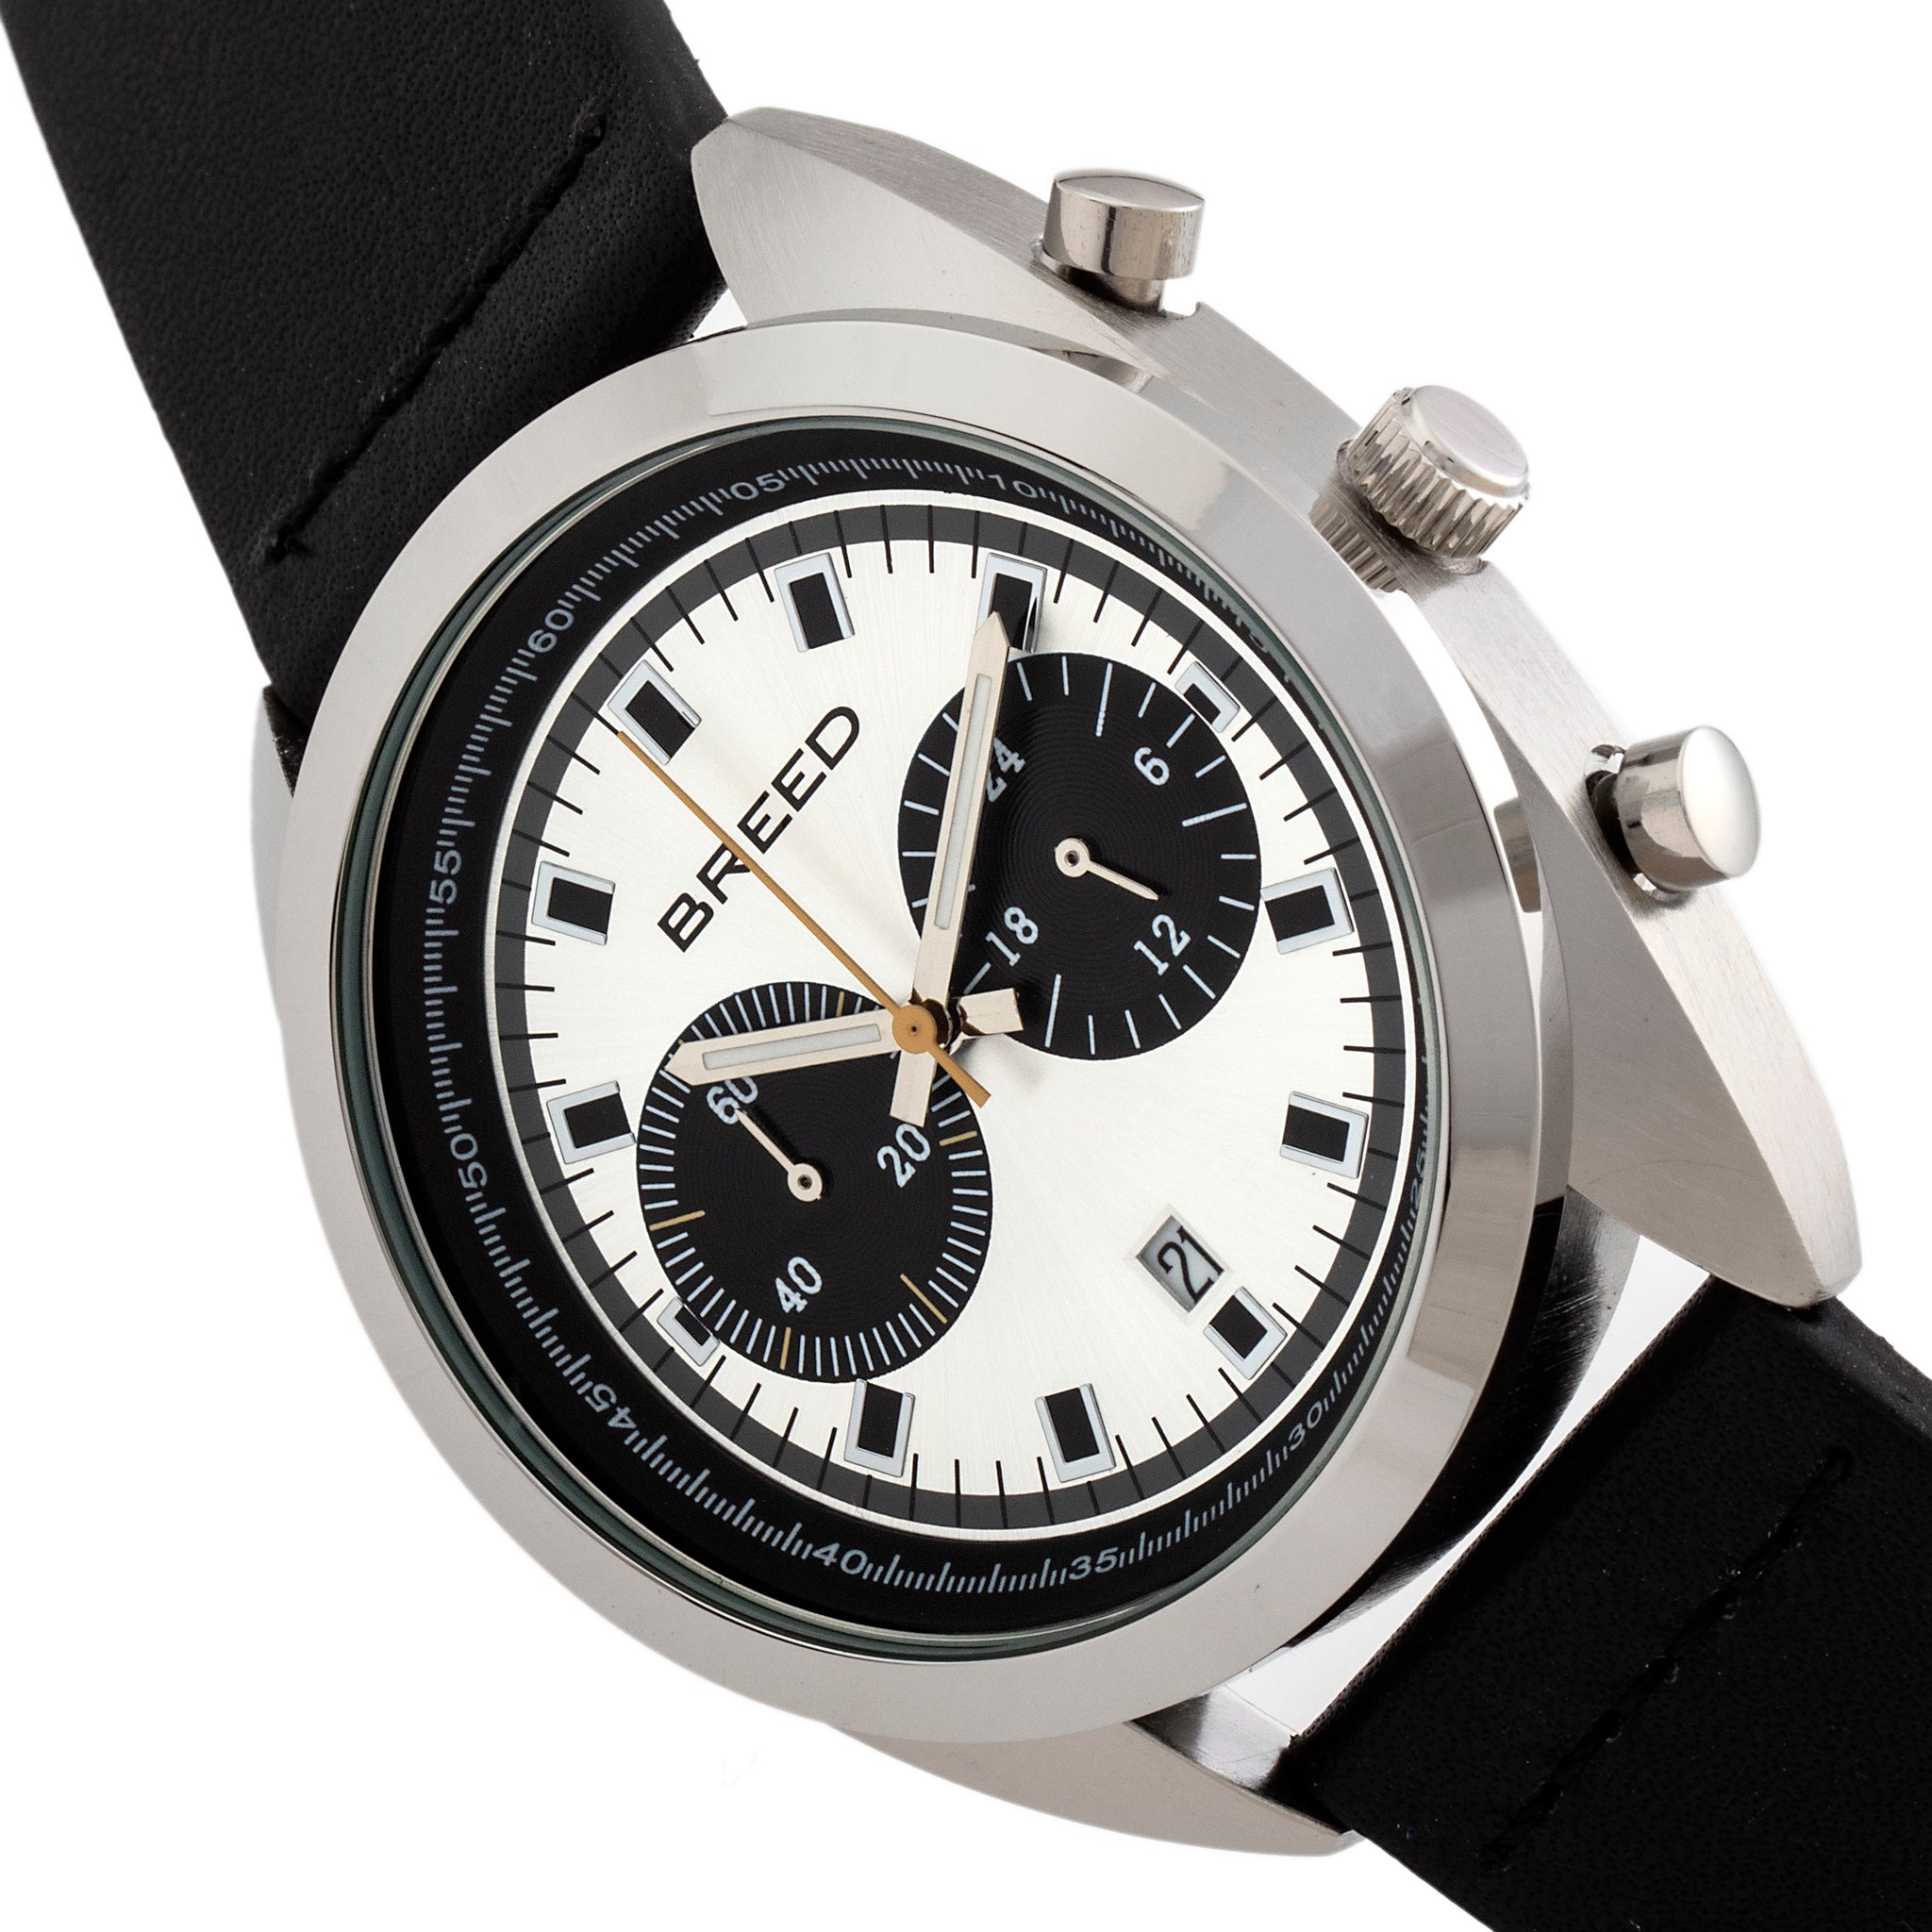 Breed Racer Chronograph Leather-Band Watch w/Date - Silver/Black - BRD8504